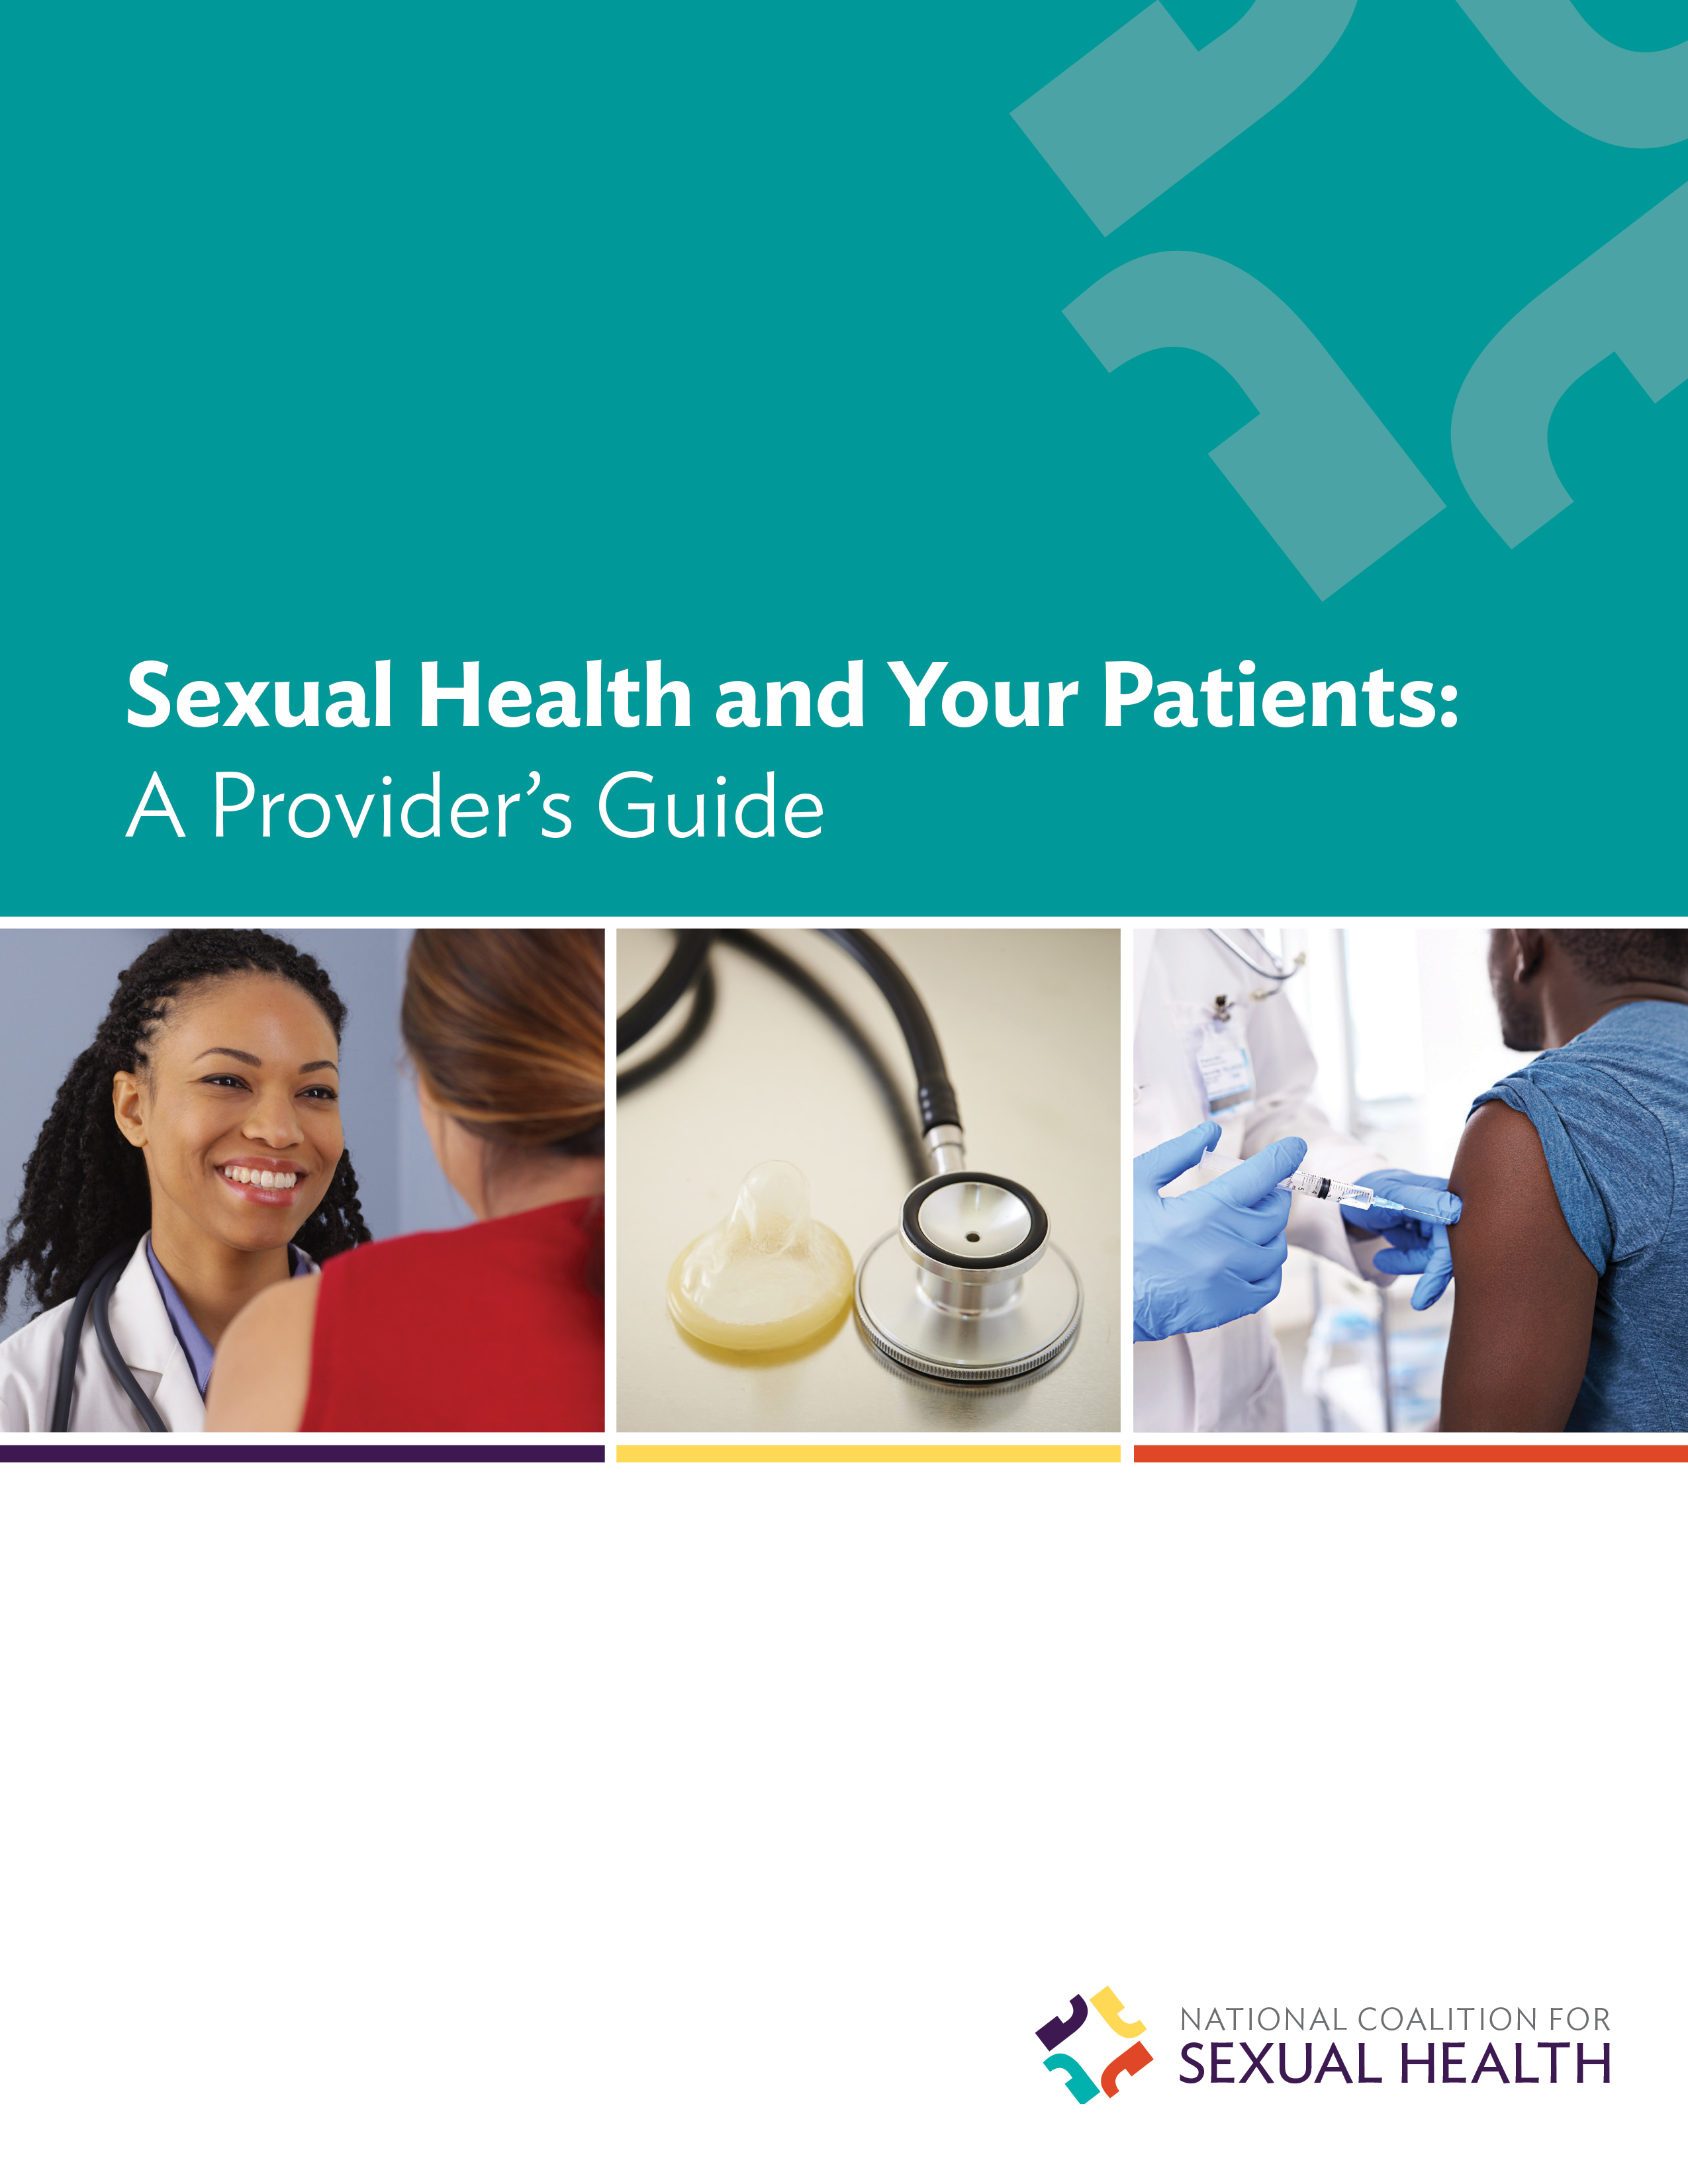 Sexual Health and Your Patients: A Provider’s Guide